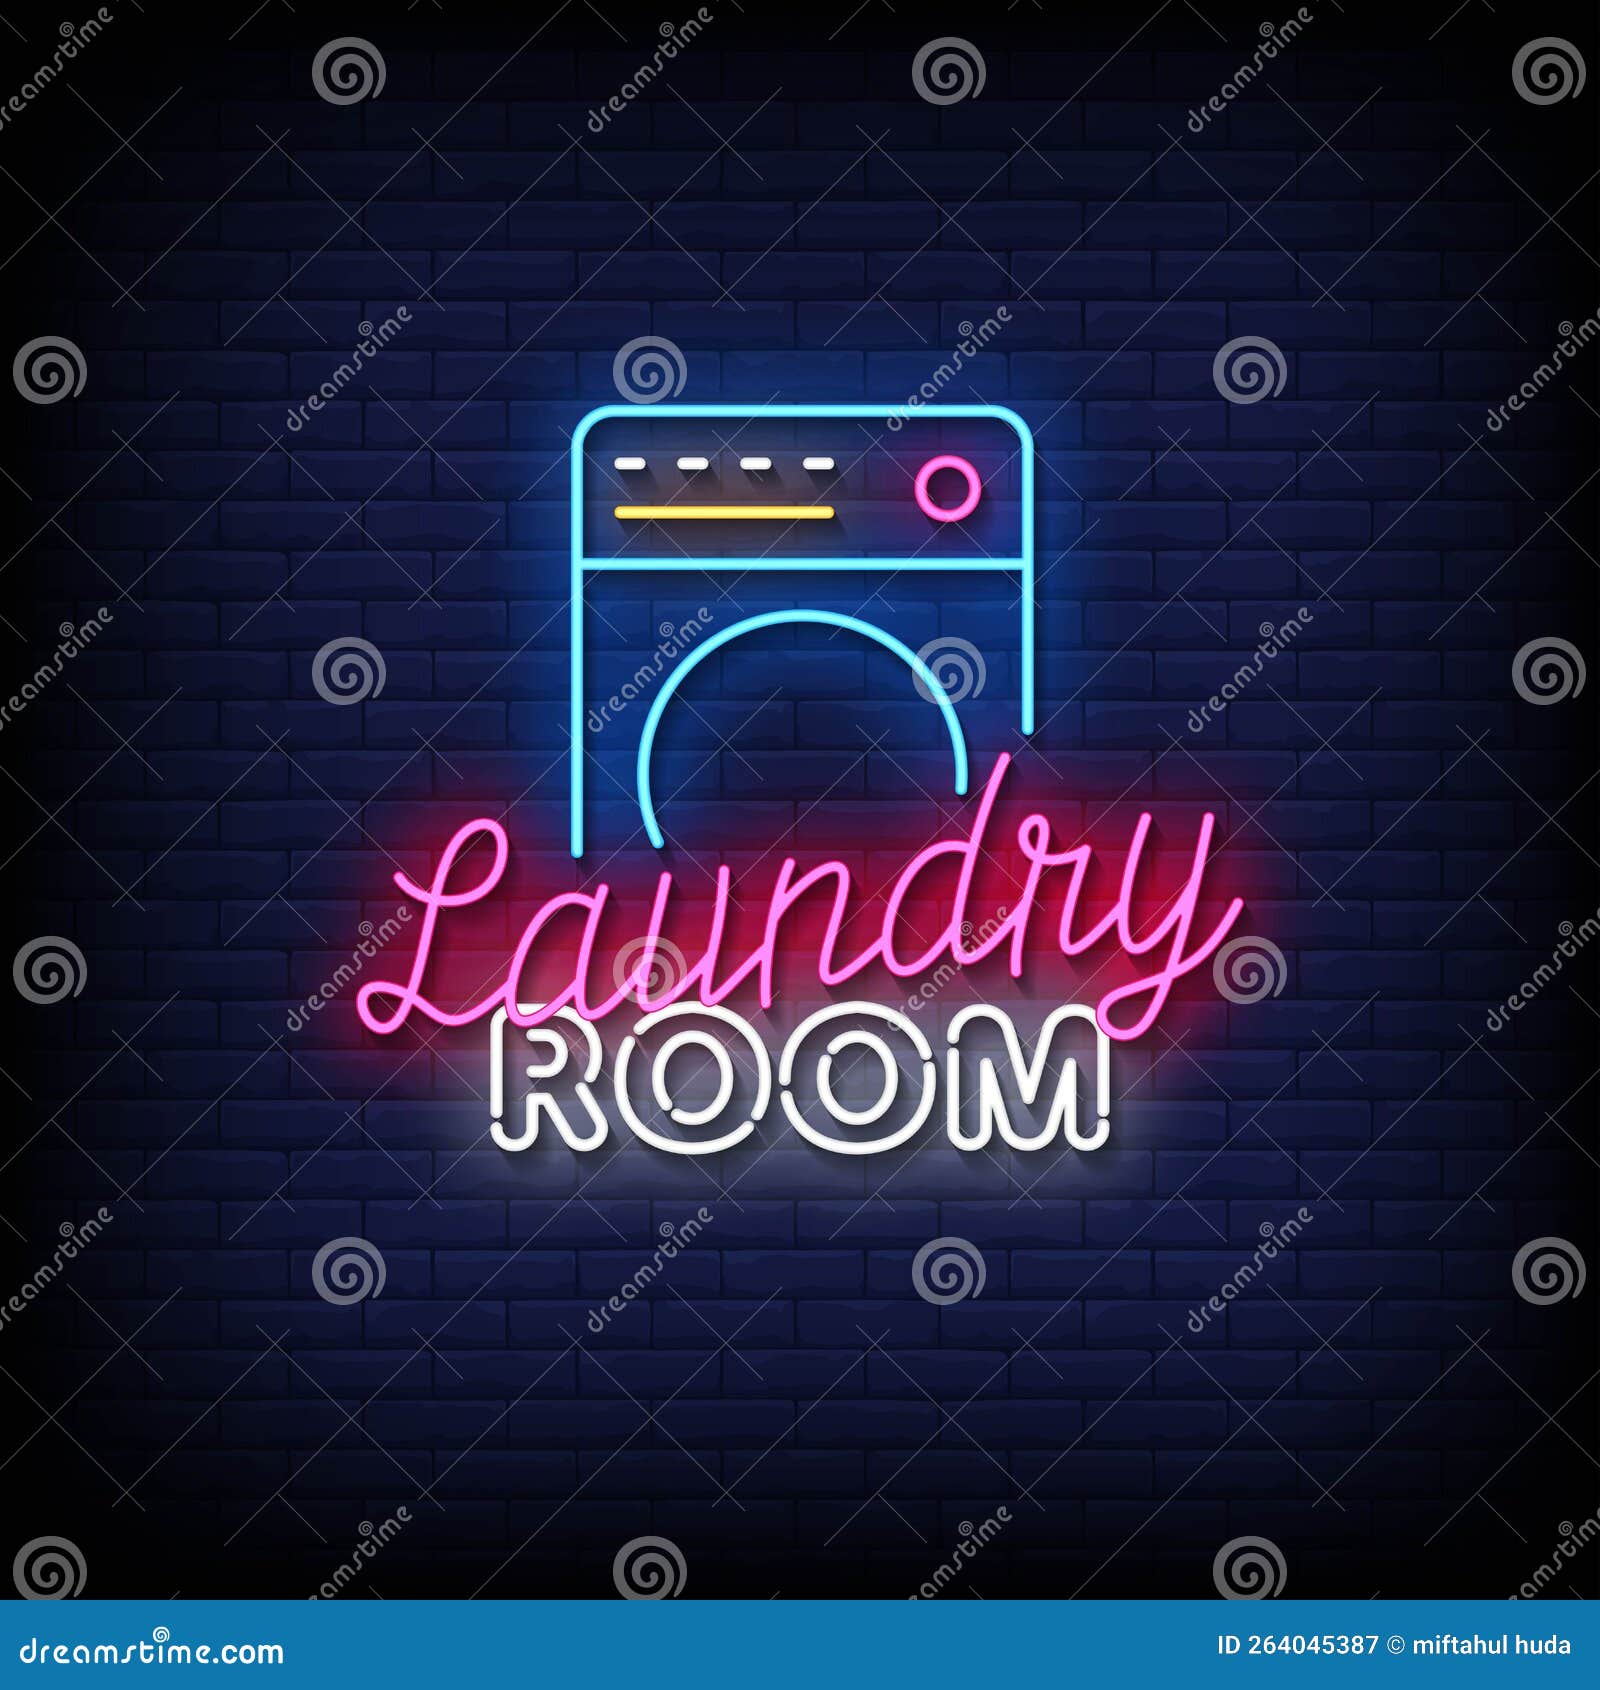 Neon Sign Laundry Room with Brick Wall Background Vector Illustration ...